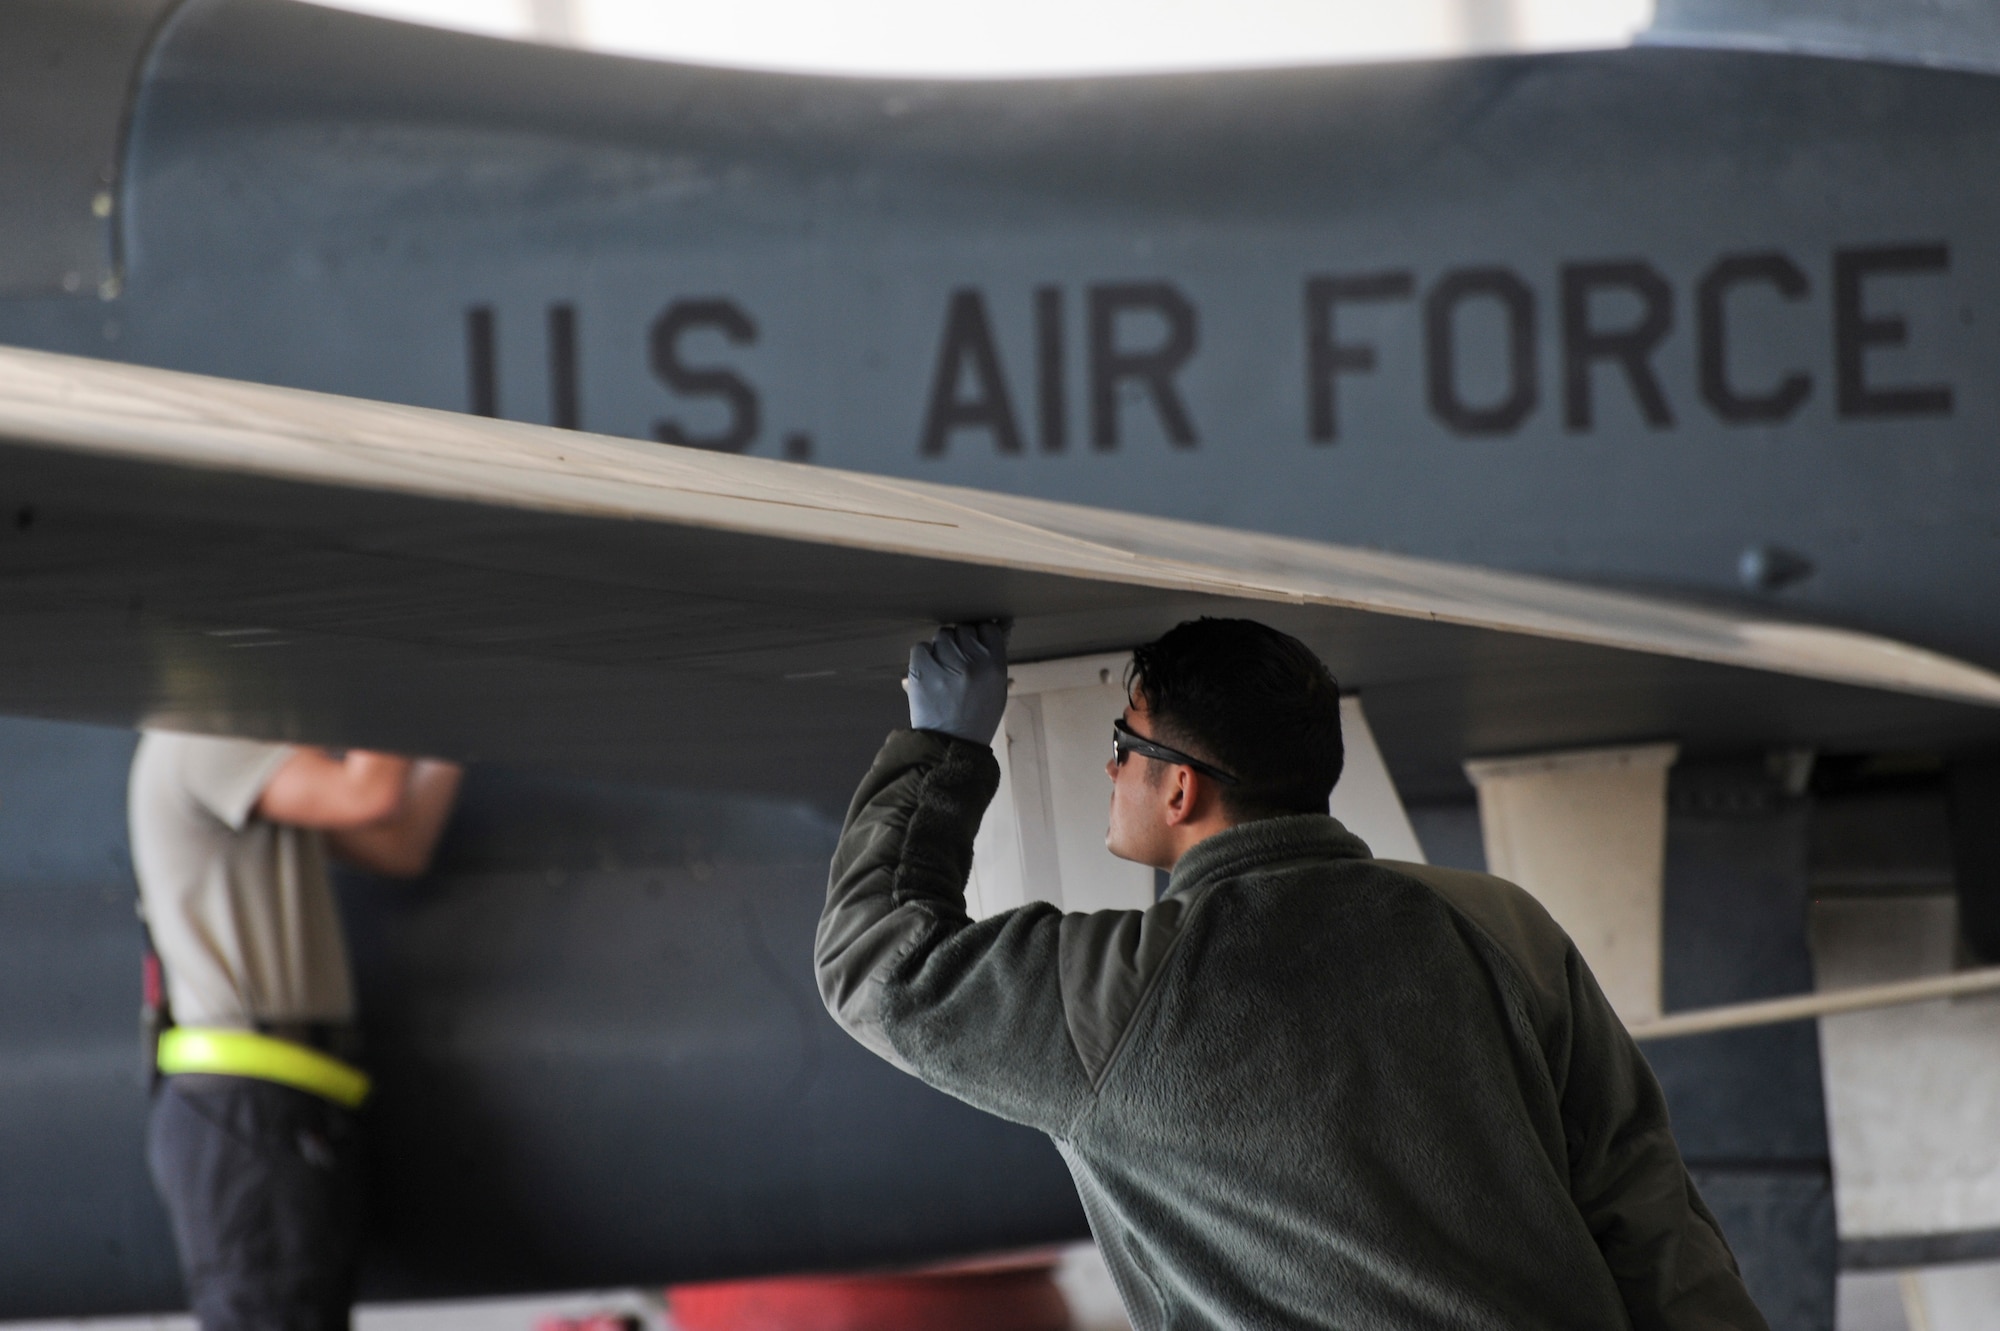 U.S. Air Force Airman 1st Class Christian De Jesus Roman, 380th Expeditionary Aircraft Maintenance Squadron crew chief, conducts post and preflight inspections on an RQ-4 Global Hawk Feb. 13, 2018 on Al Dhafra Air Base. The RQ-4 Global Hawk is a high-altitude, long-endurance, remotely piloted aircraft with an integrated sensor suite that provides global all-weather, day or night intelligence, surveillance and reconnaissance (ISR) capability. (U.S. Air Force photo by Airman 1st Class D. Blake Browning)